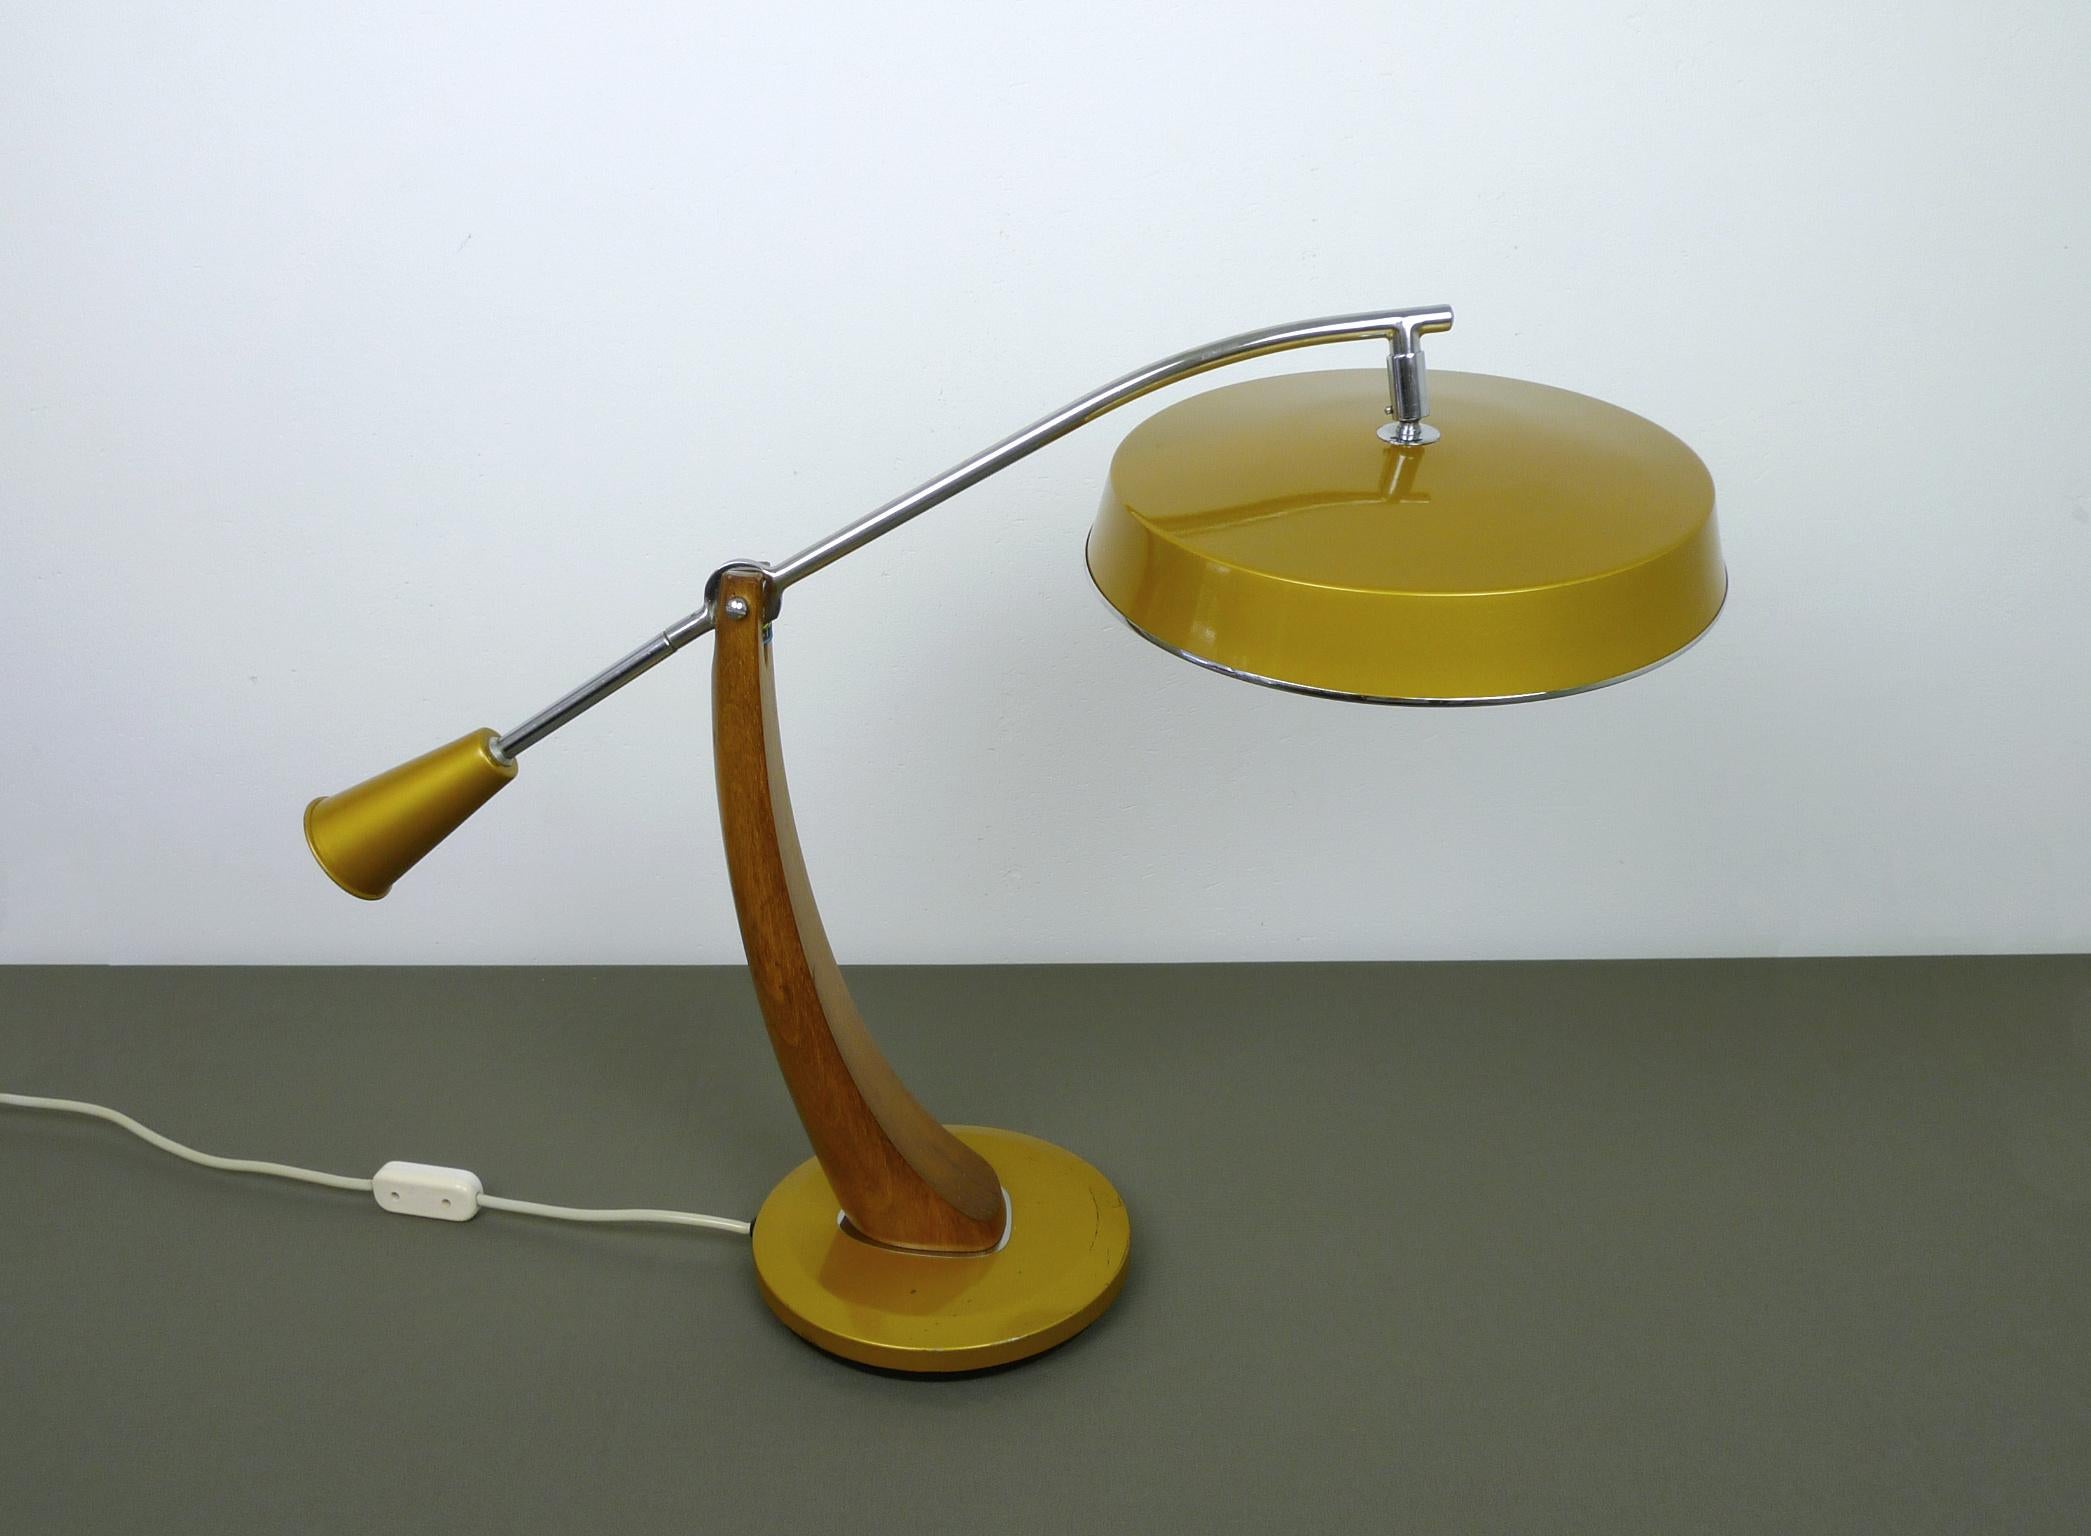 This large model El Presidente Péndulo desk lamp was produced by the Spanish manufacturer Lamparas FASE in the 1960s. 
It is made of metal and supported by a curved stand made of solid teak. The joints and the cantilever arm are plated in chrome